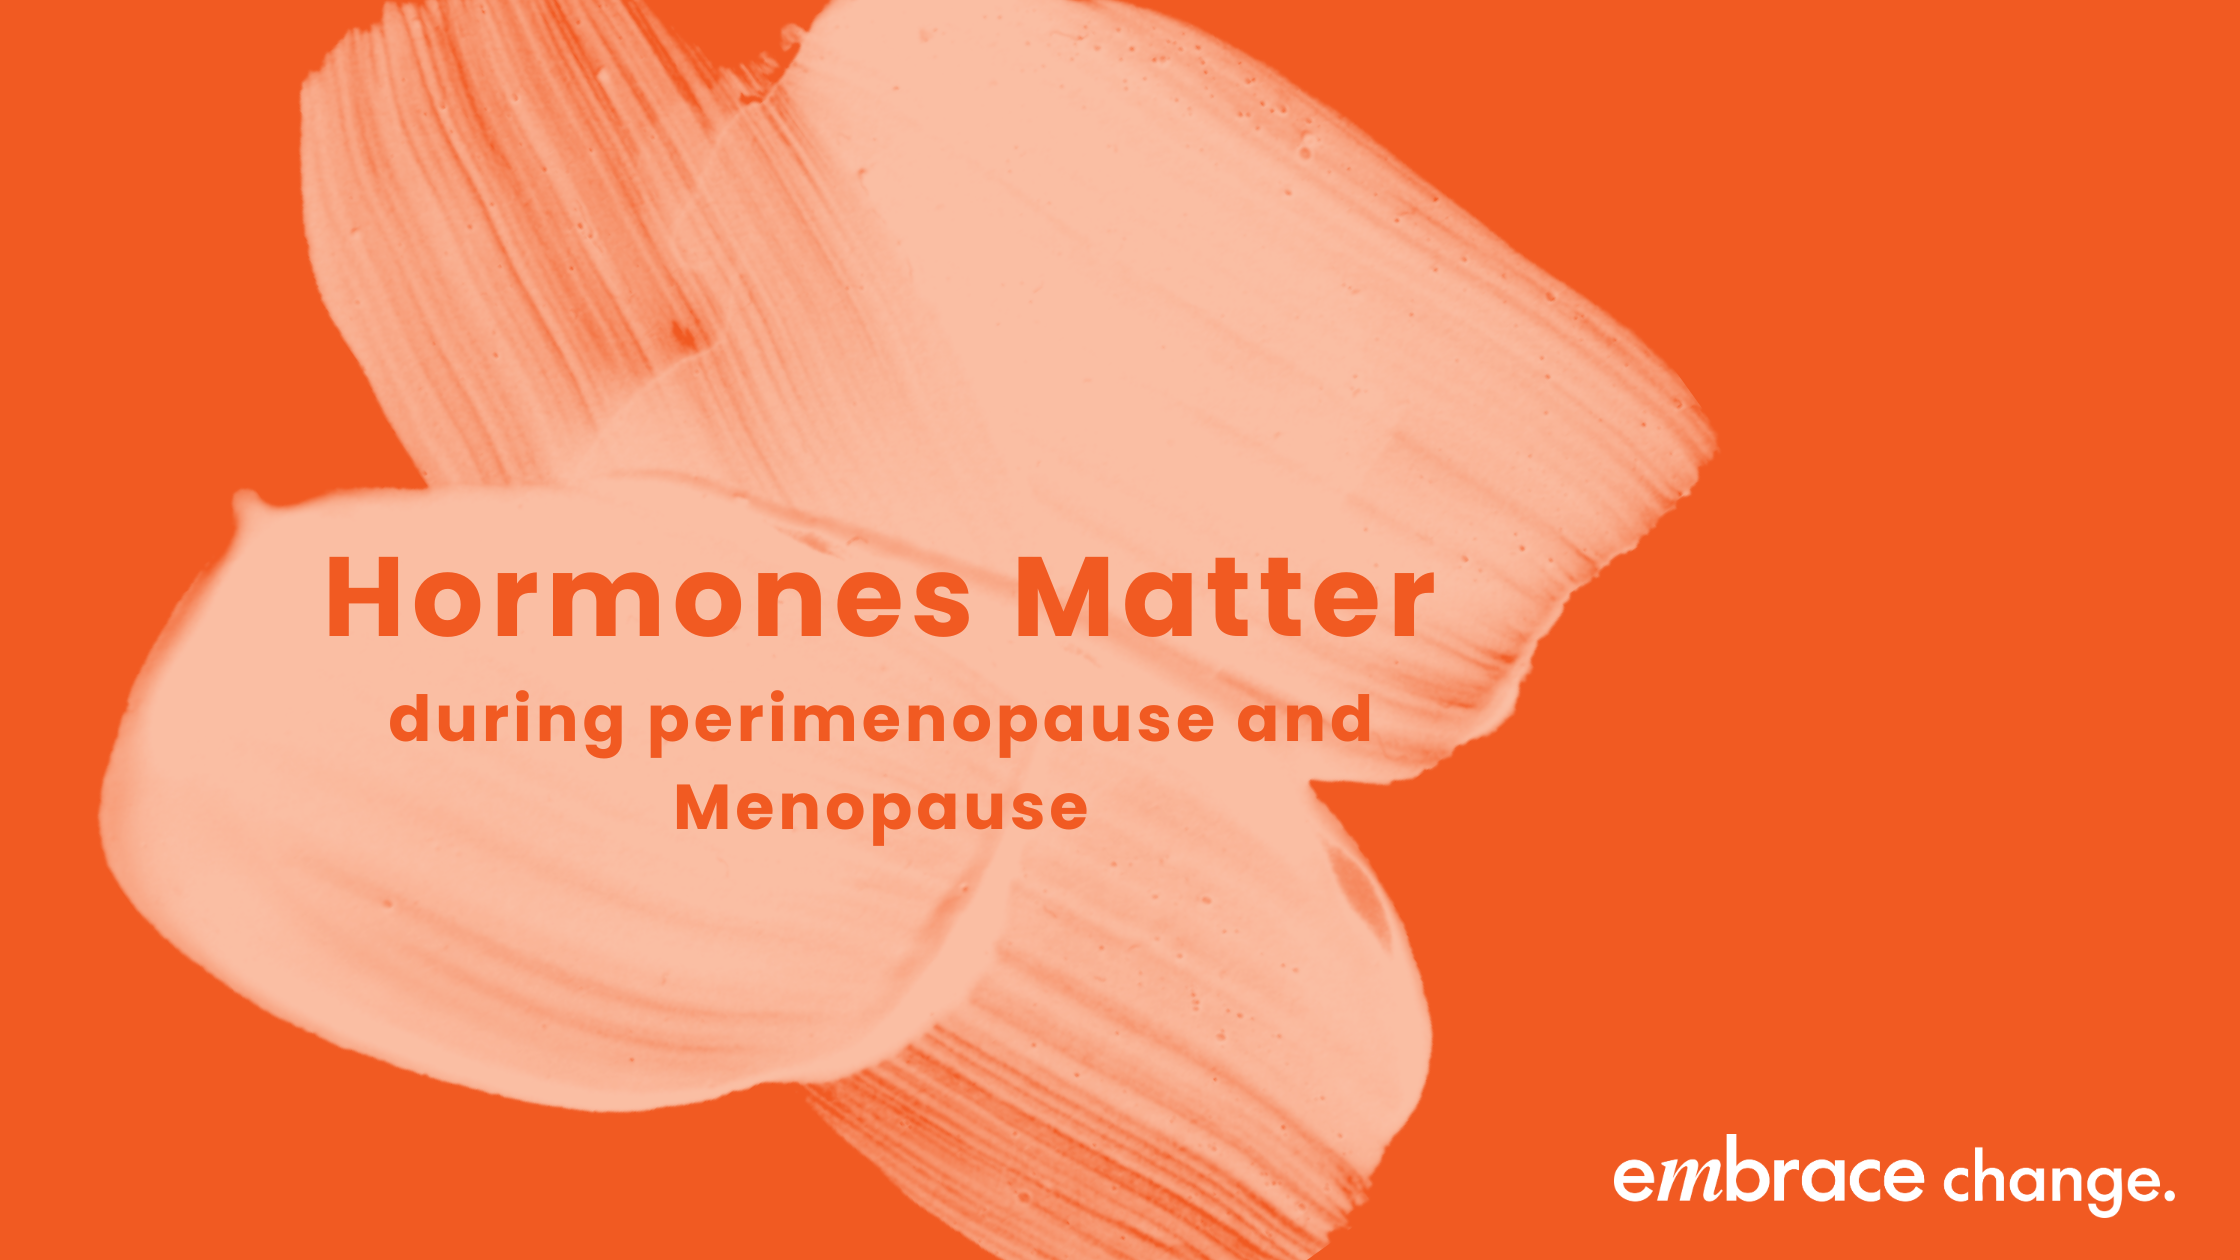 During Perimenopause and Menopause the levels of oestrogen, pogesterone and testosterone all change often leading to distressing symptoms in women